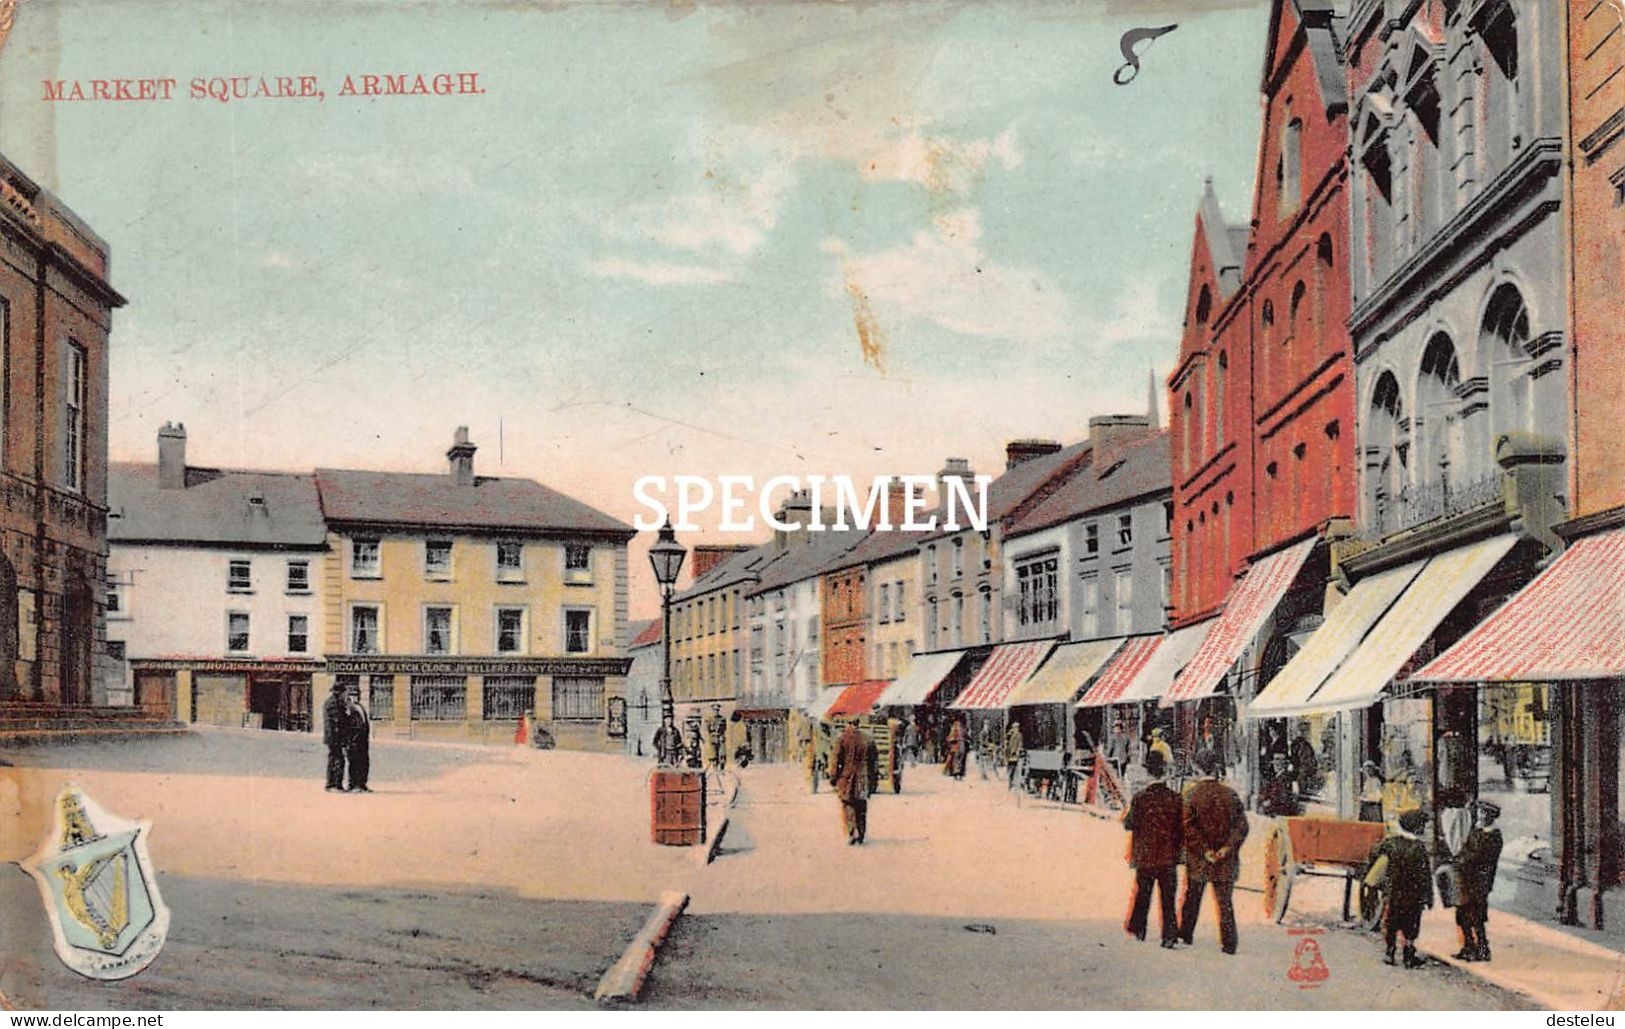 Market Square - Armagh - Armagh